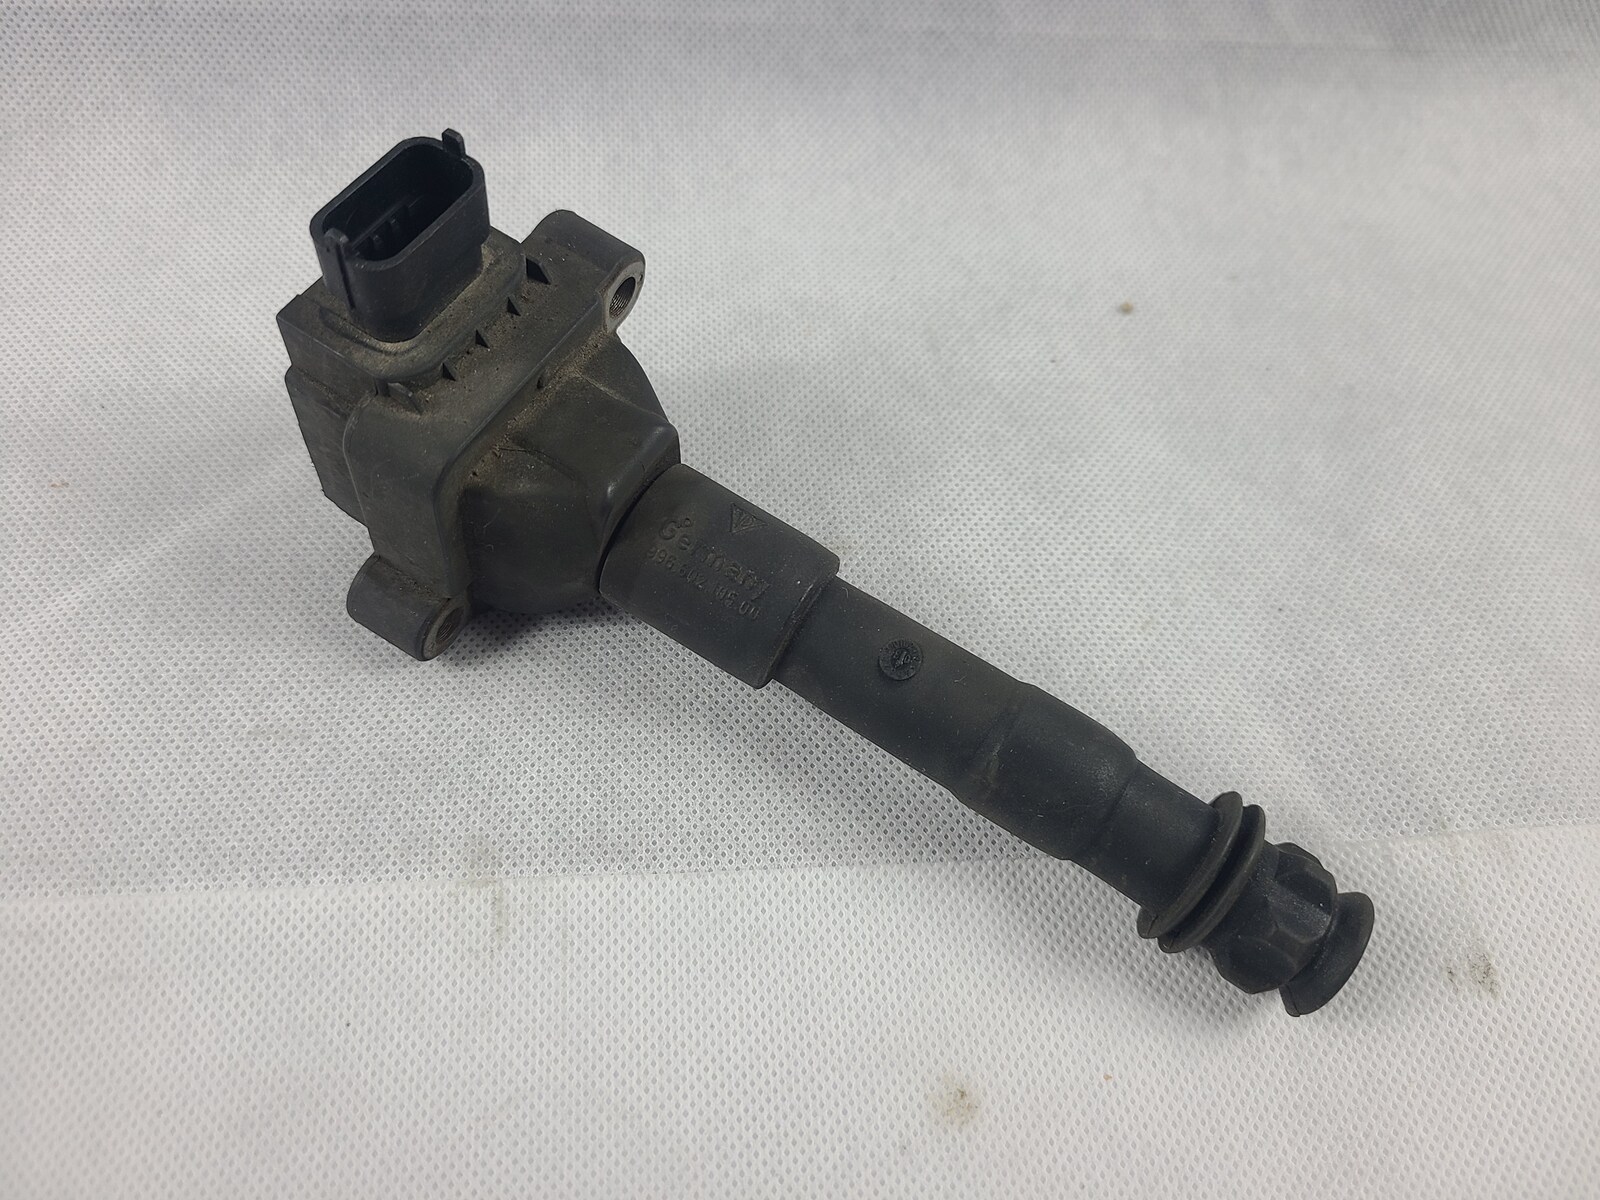 Genuine Porsche 986 996 Carrera C4S ignition coil pack tested working ...